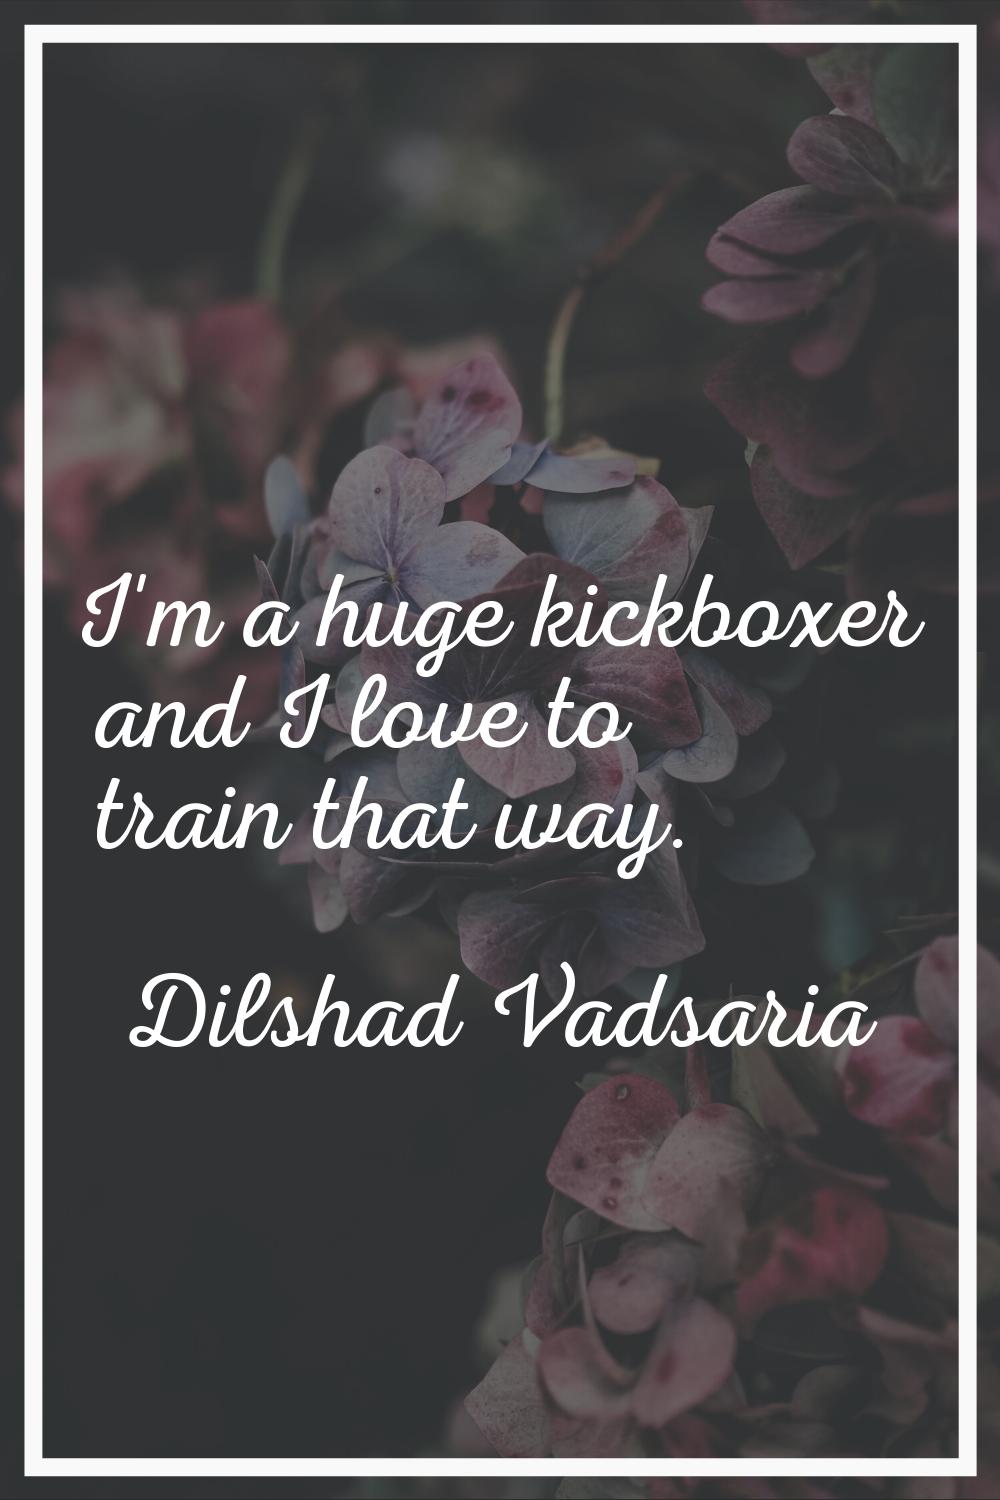 I'm a huge kickboxer and I love to train that way.